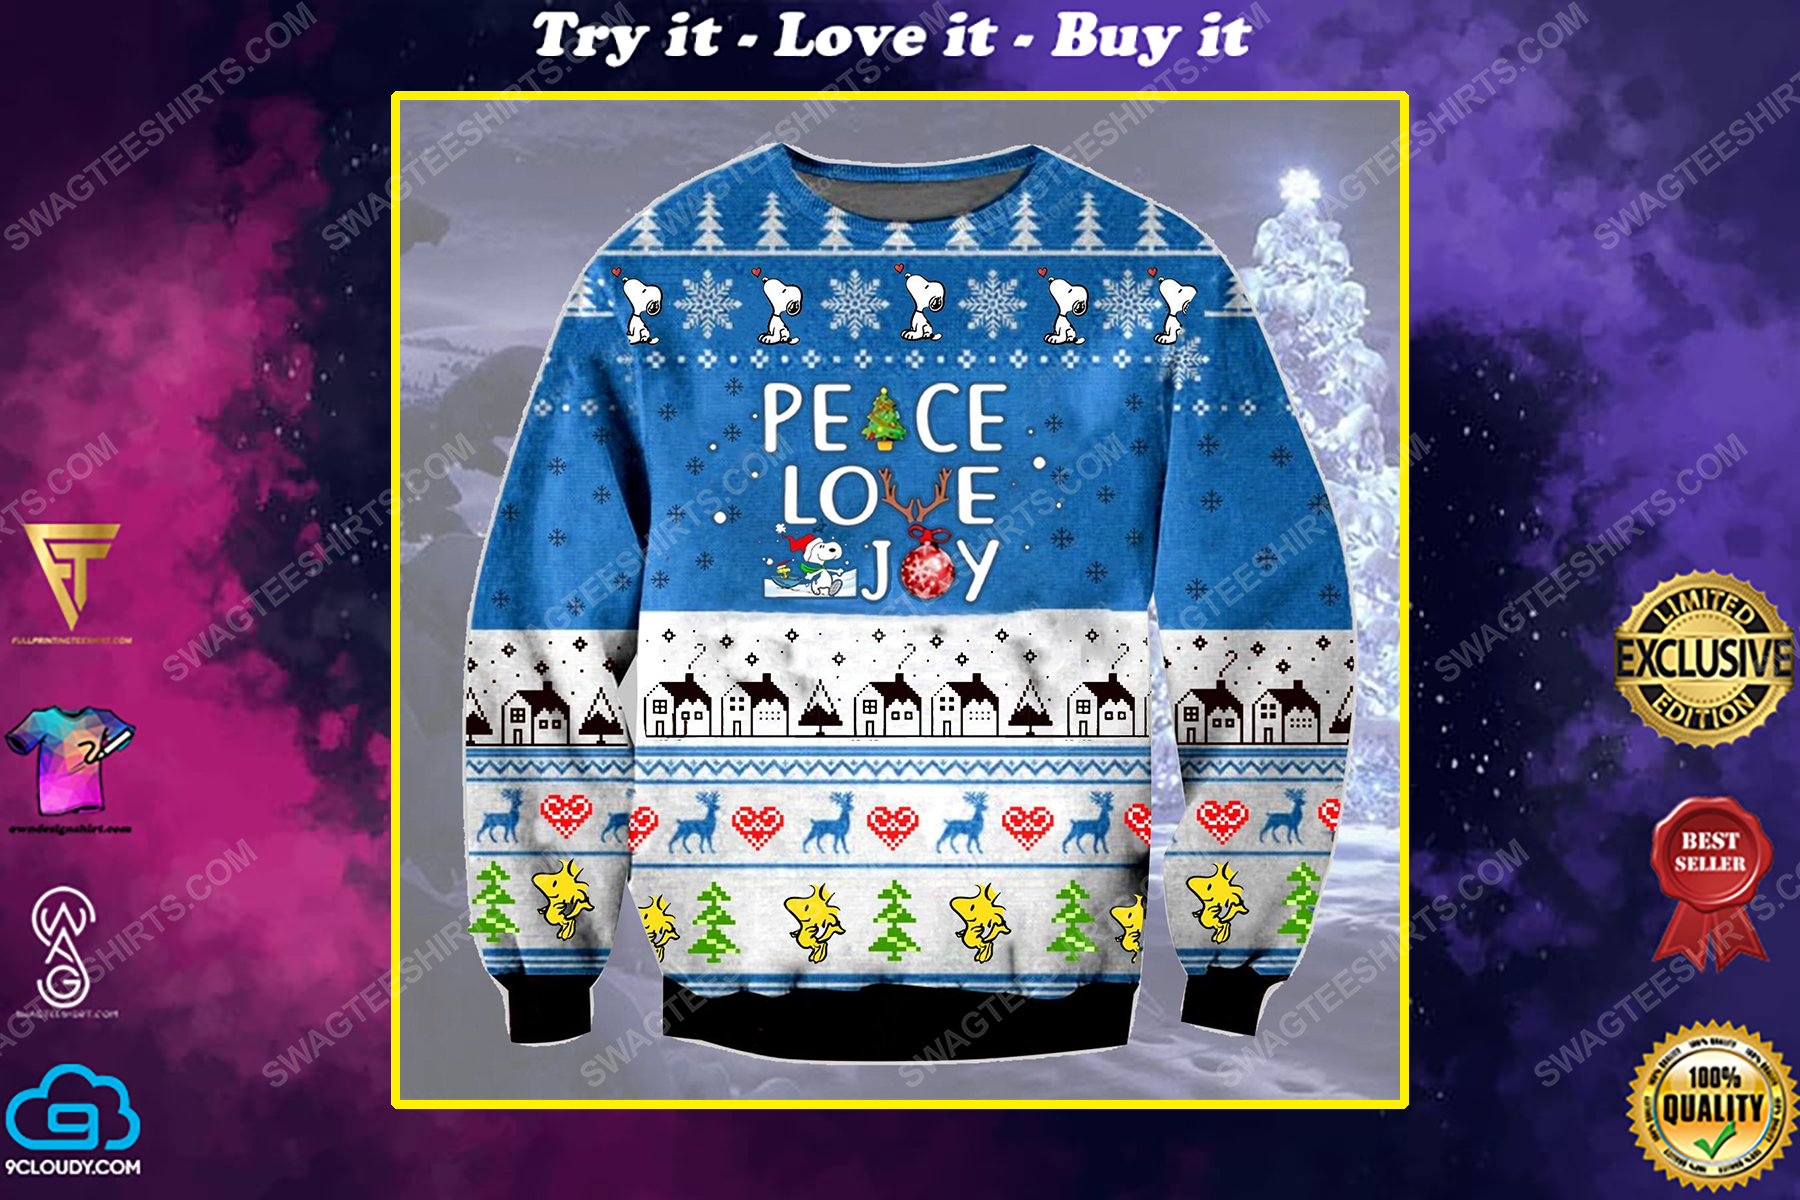 Charlie brown and snoopy peace love joy ugly christmas sweater 1